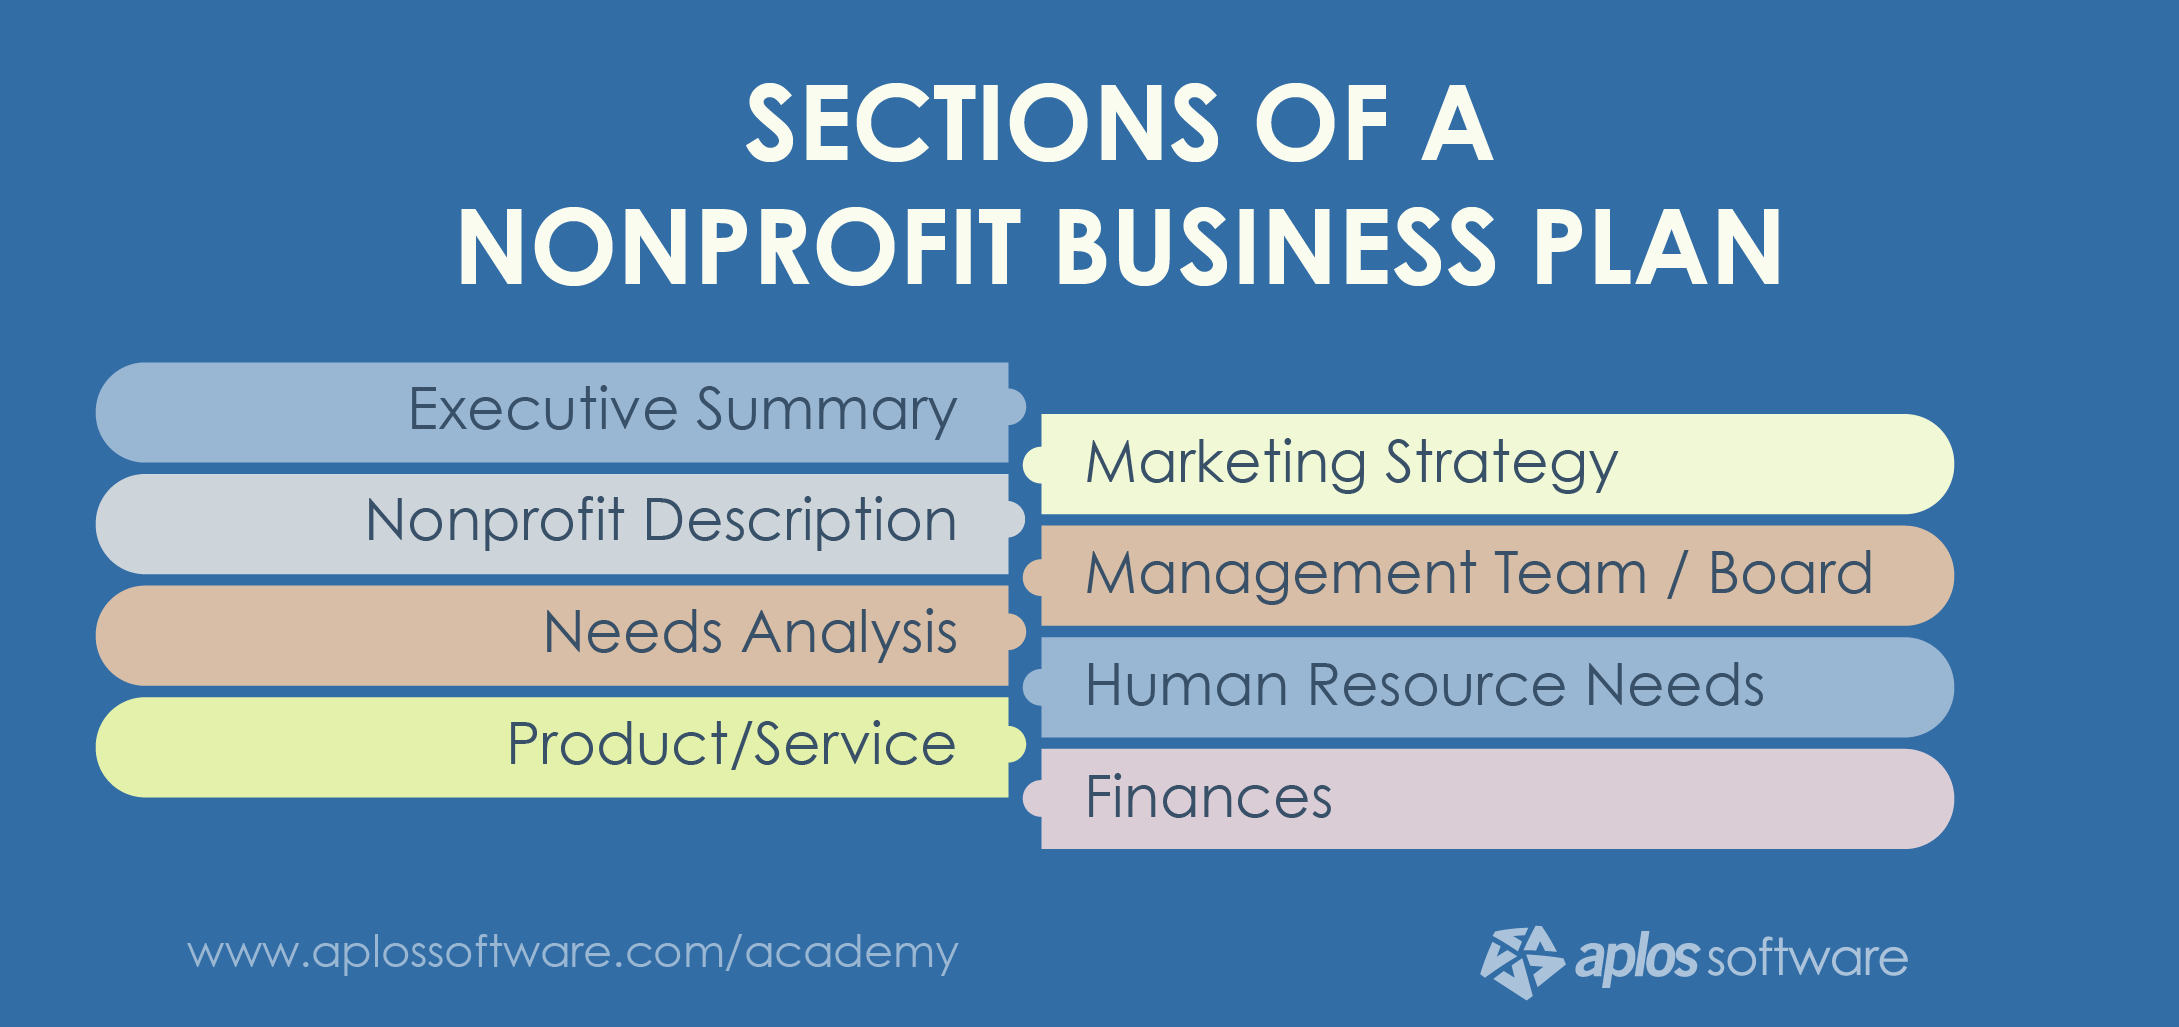 How To Write A Nonprofit Business Plan → Why You Need A Nonprofit Business  Plan - Aplos Training Center